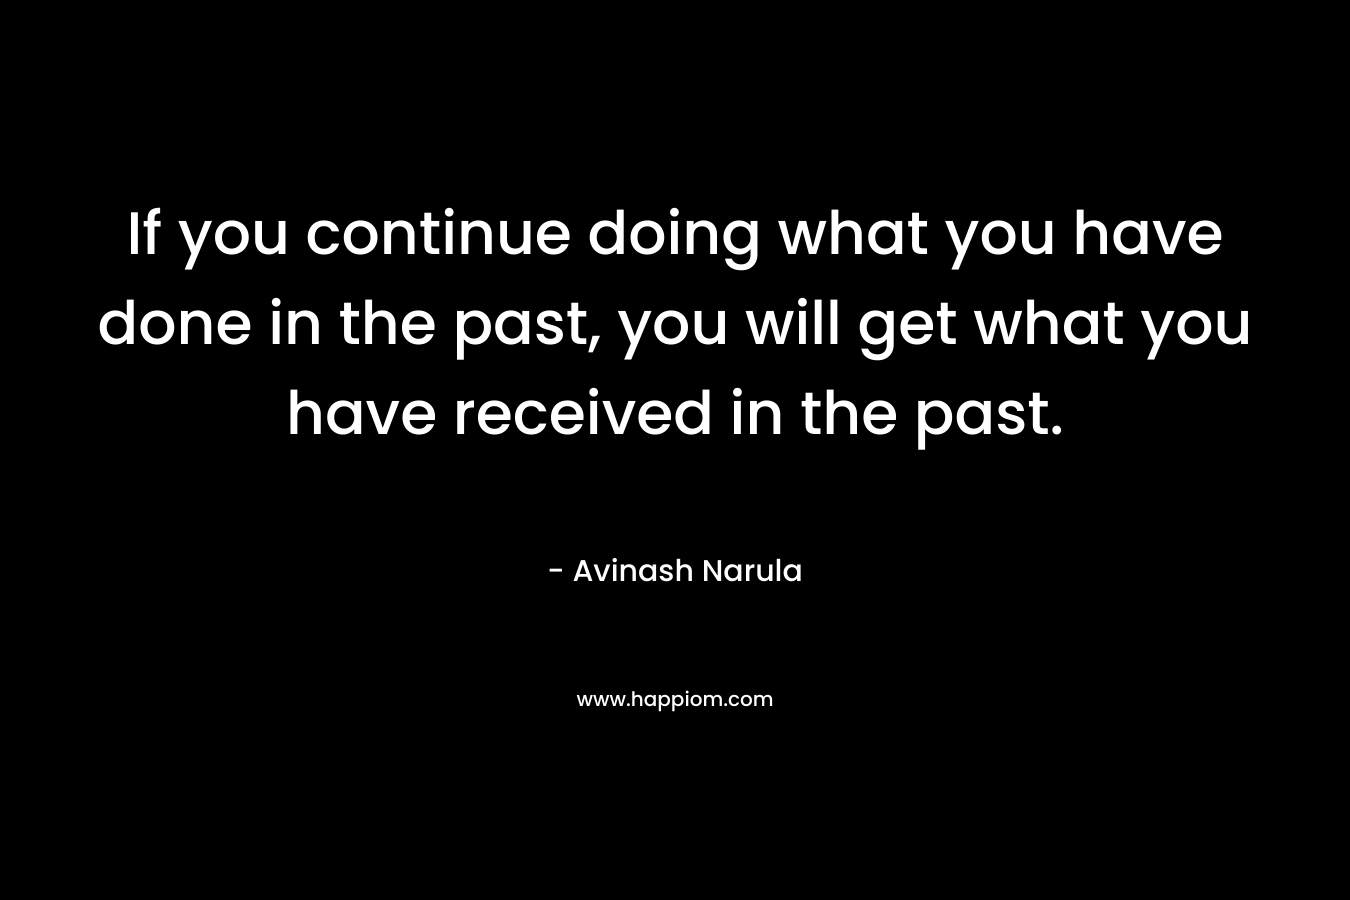 If you continue doing what you have done in the past, you will get what you have received in the past. – Avinash Narula